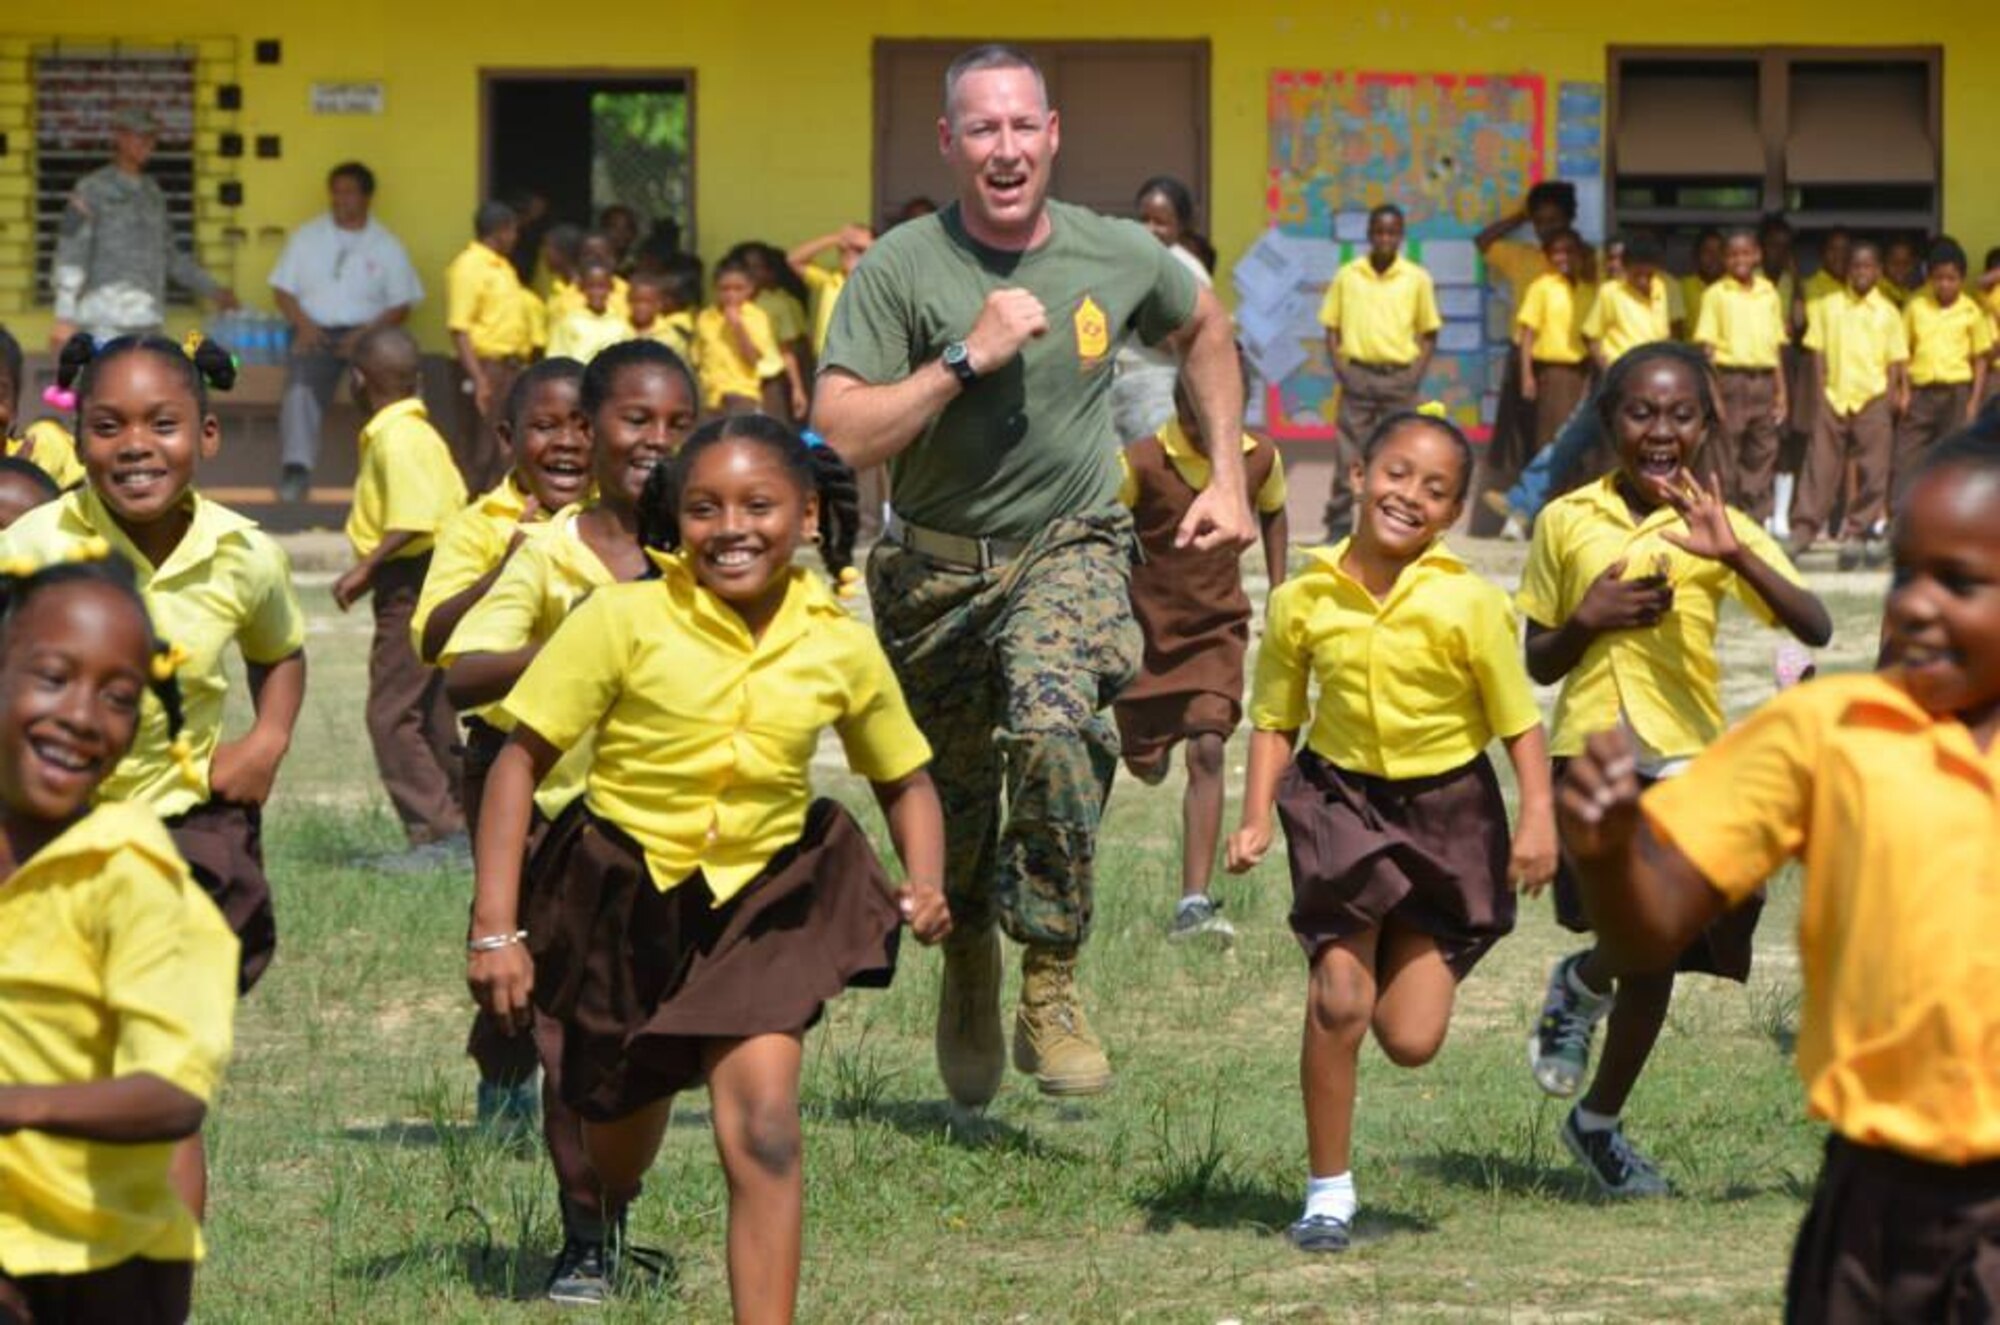 U.S. Marine Corps Gunnery Sgt. Keith Day challenges Hattieville Government School students to a race during a physical fitness lesson he led. Day is deployed in support of the New Horizons training exercise in Belize.